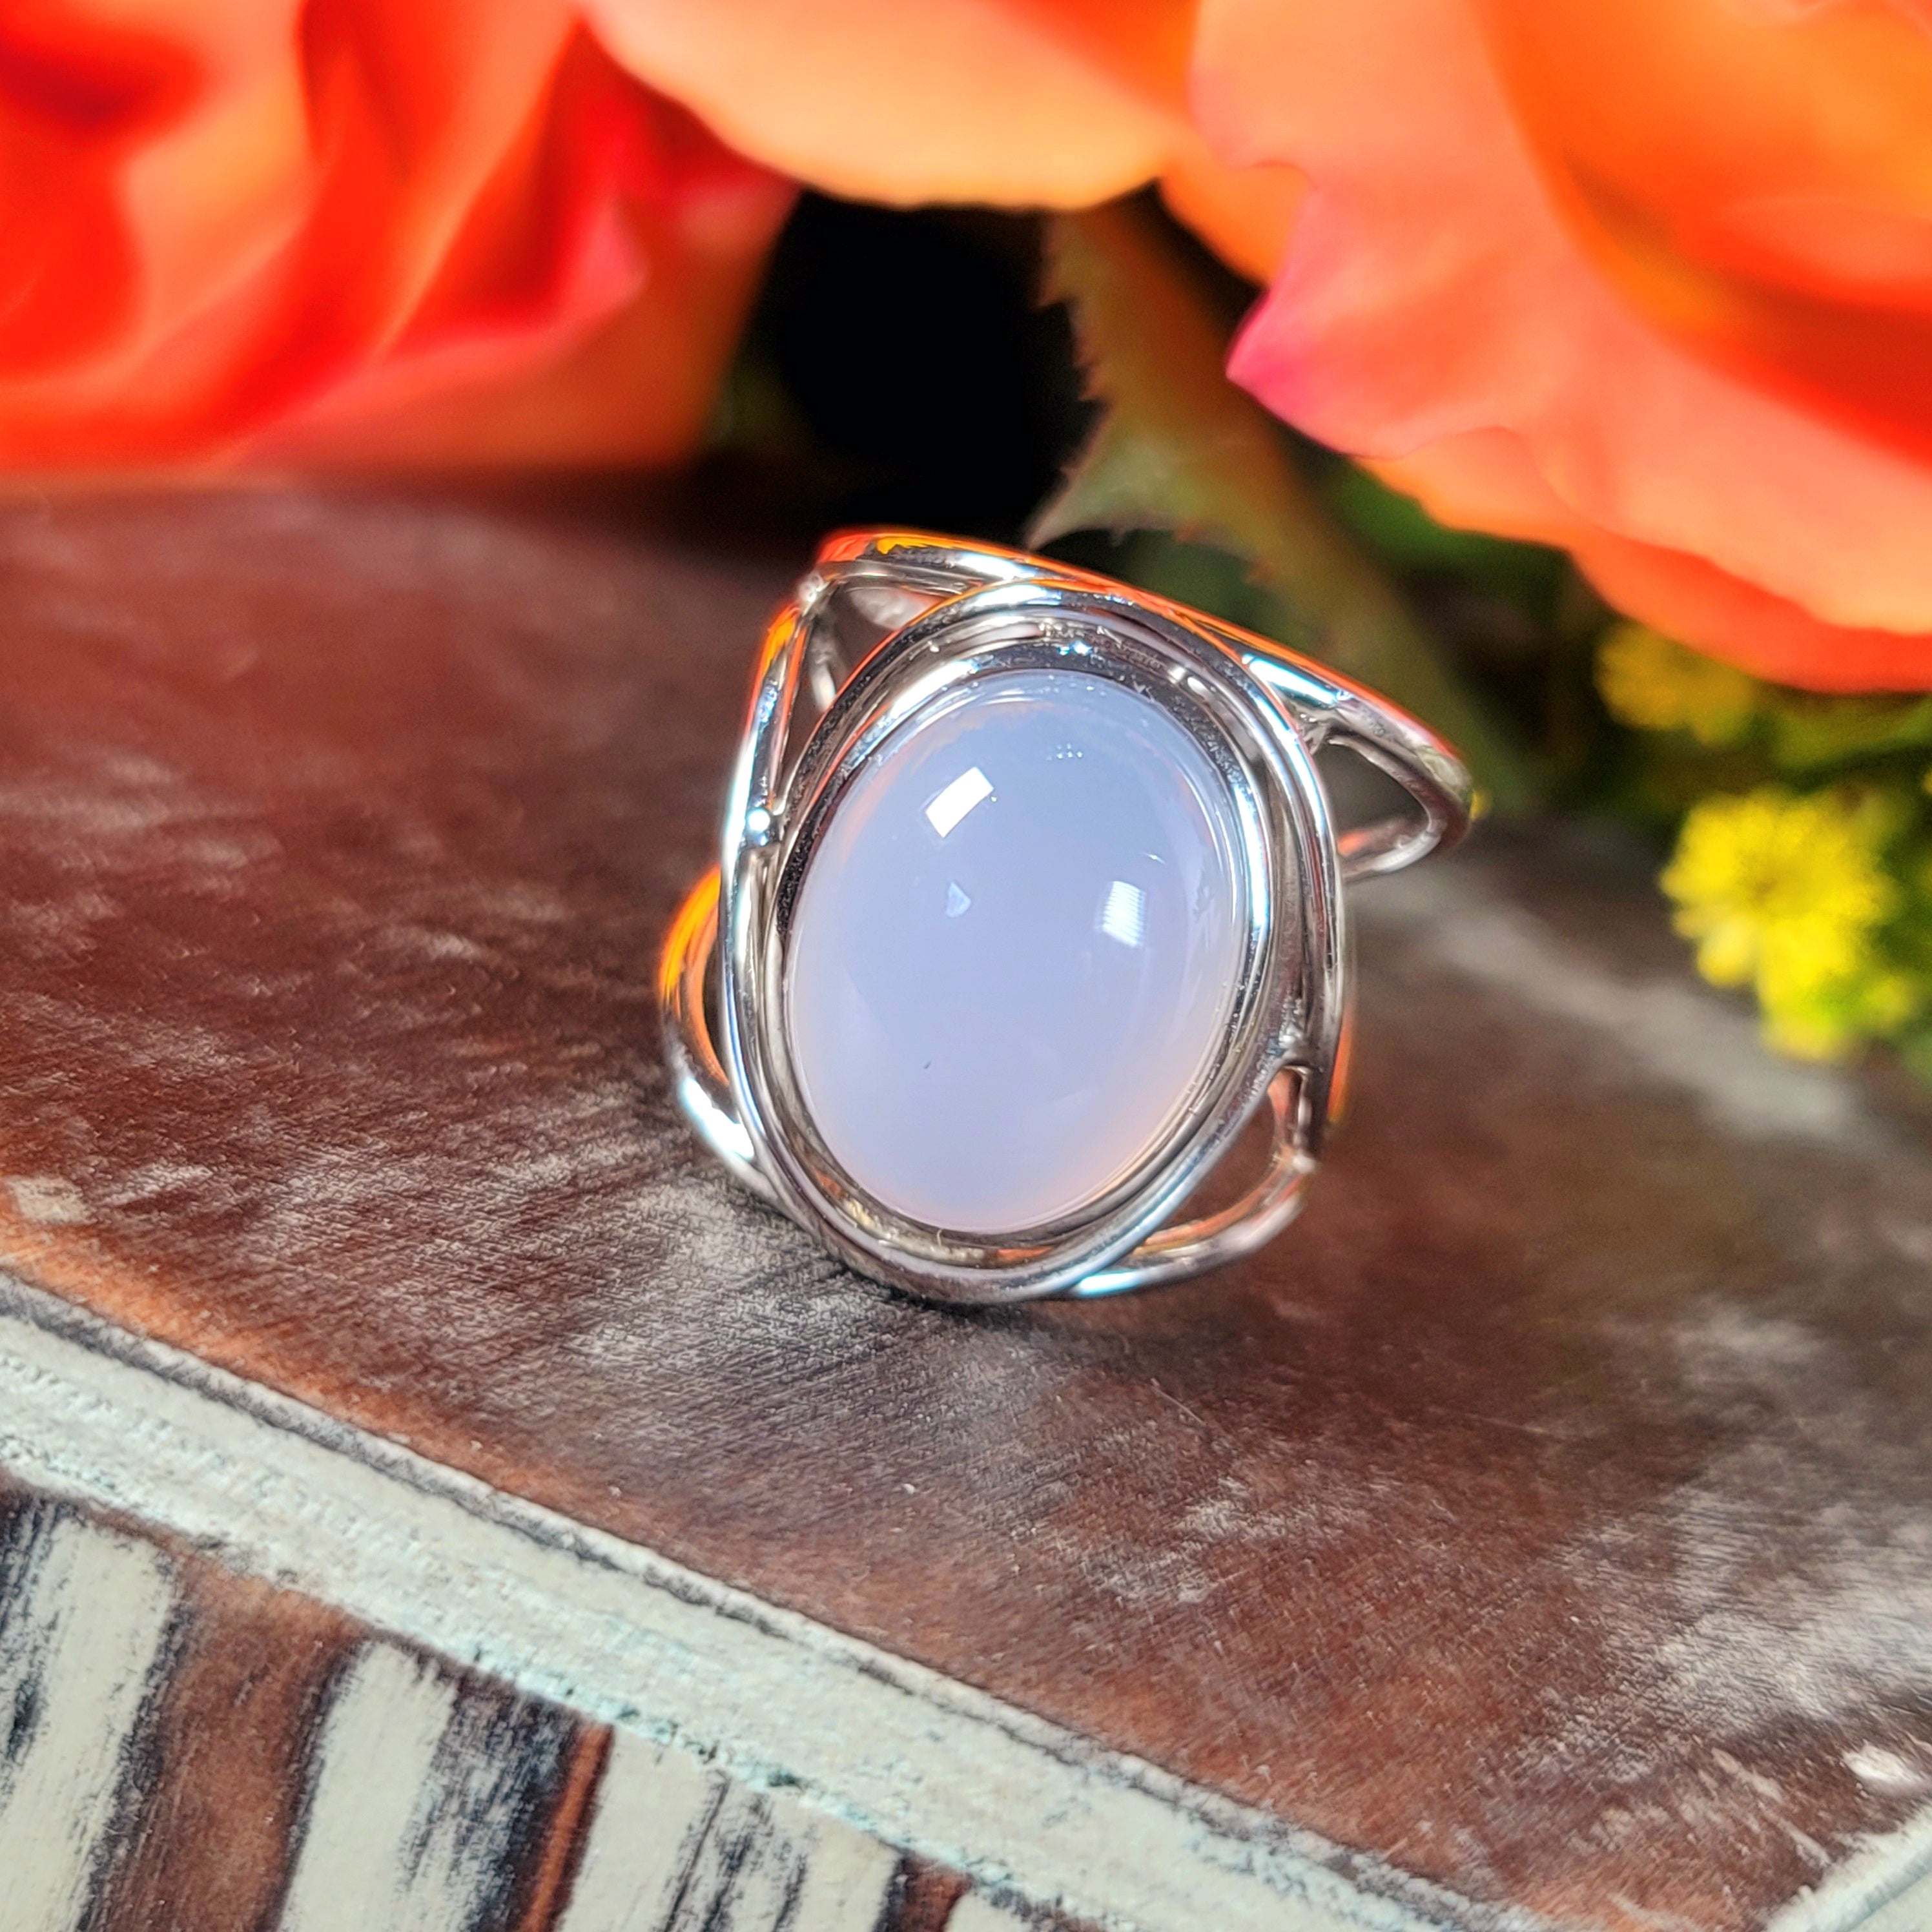 Blue Chalcedony Finger Cuff Adjustable Ring .925 Silver for Soothing the Body, Mind and Spirit